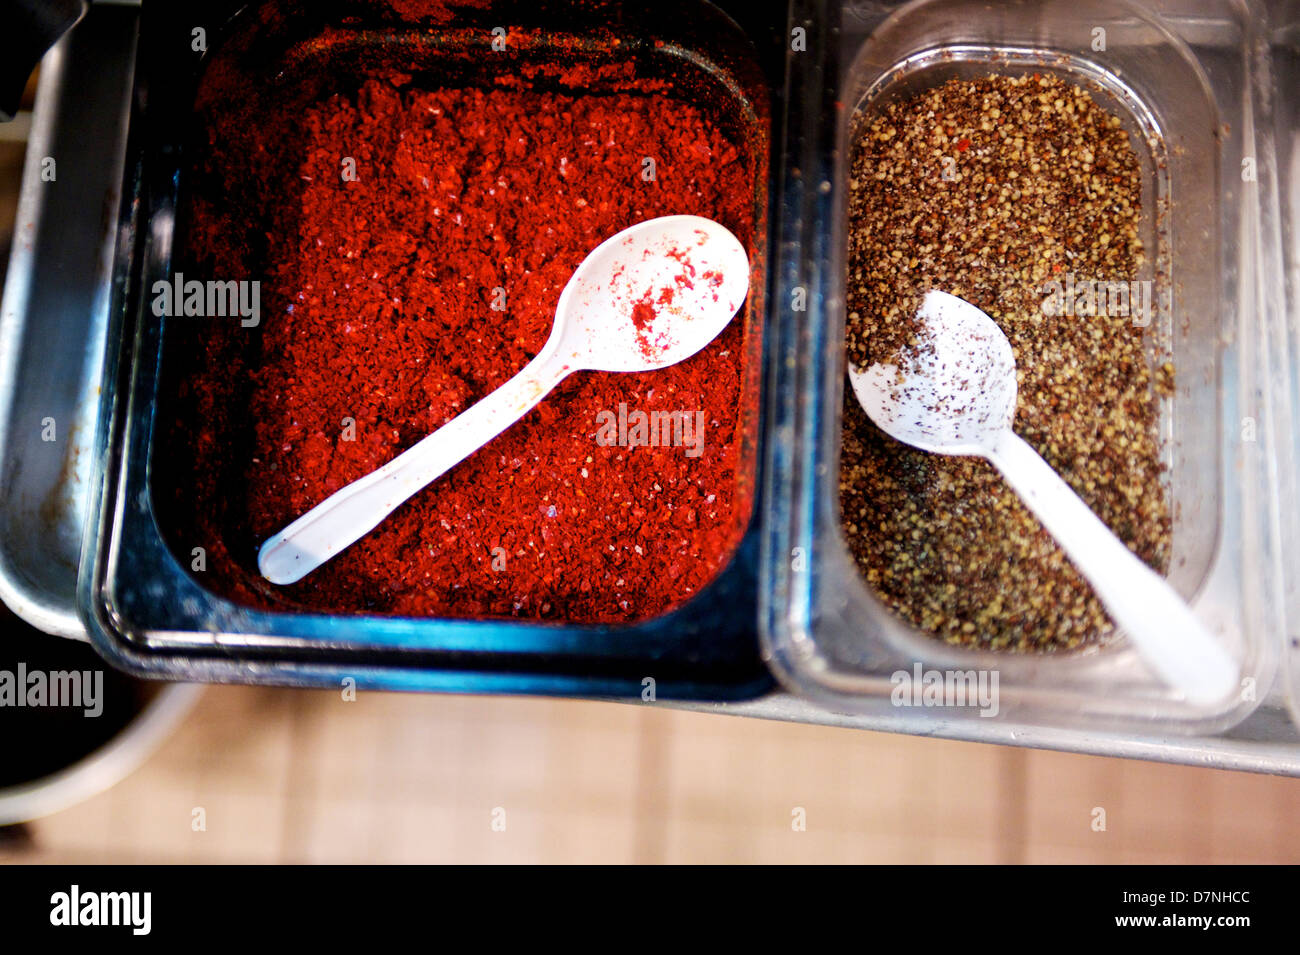 Hot Indian Asian spices in a restaurant kitchen. Stock Photo